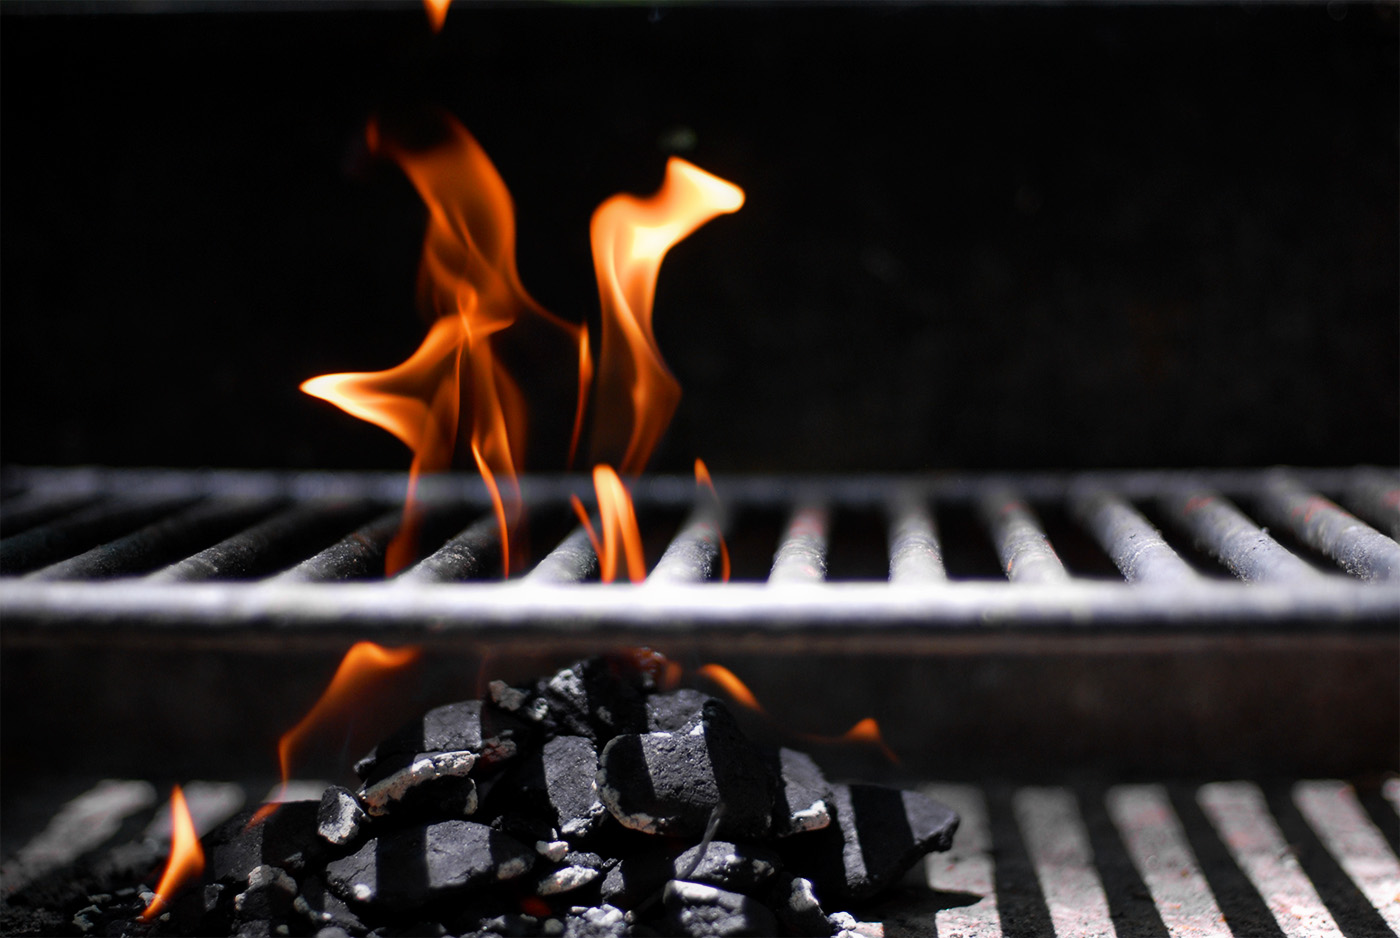 Take Safety Home: Grilling Safety